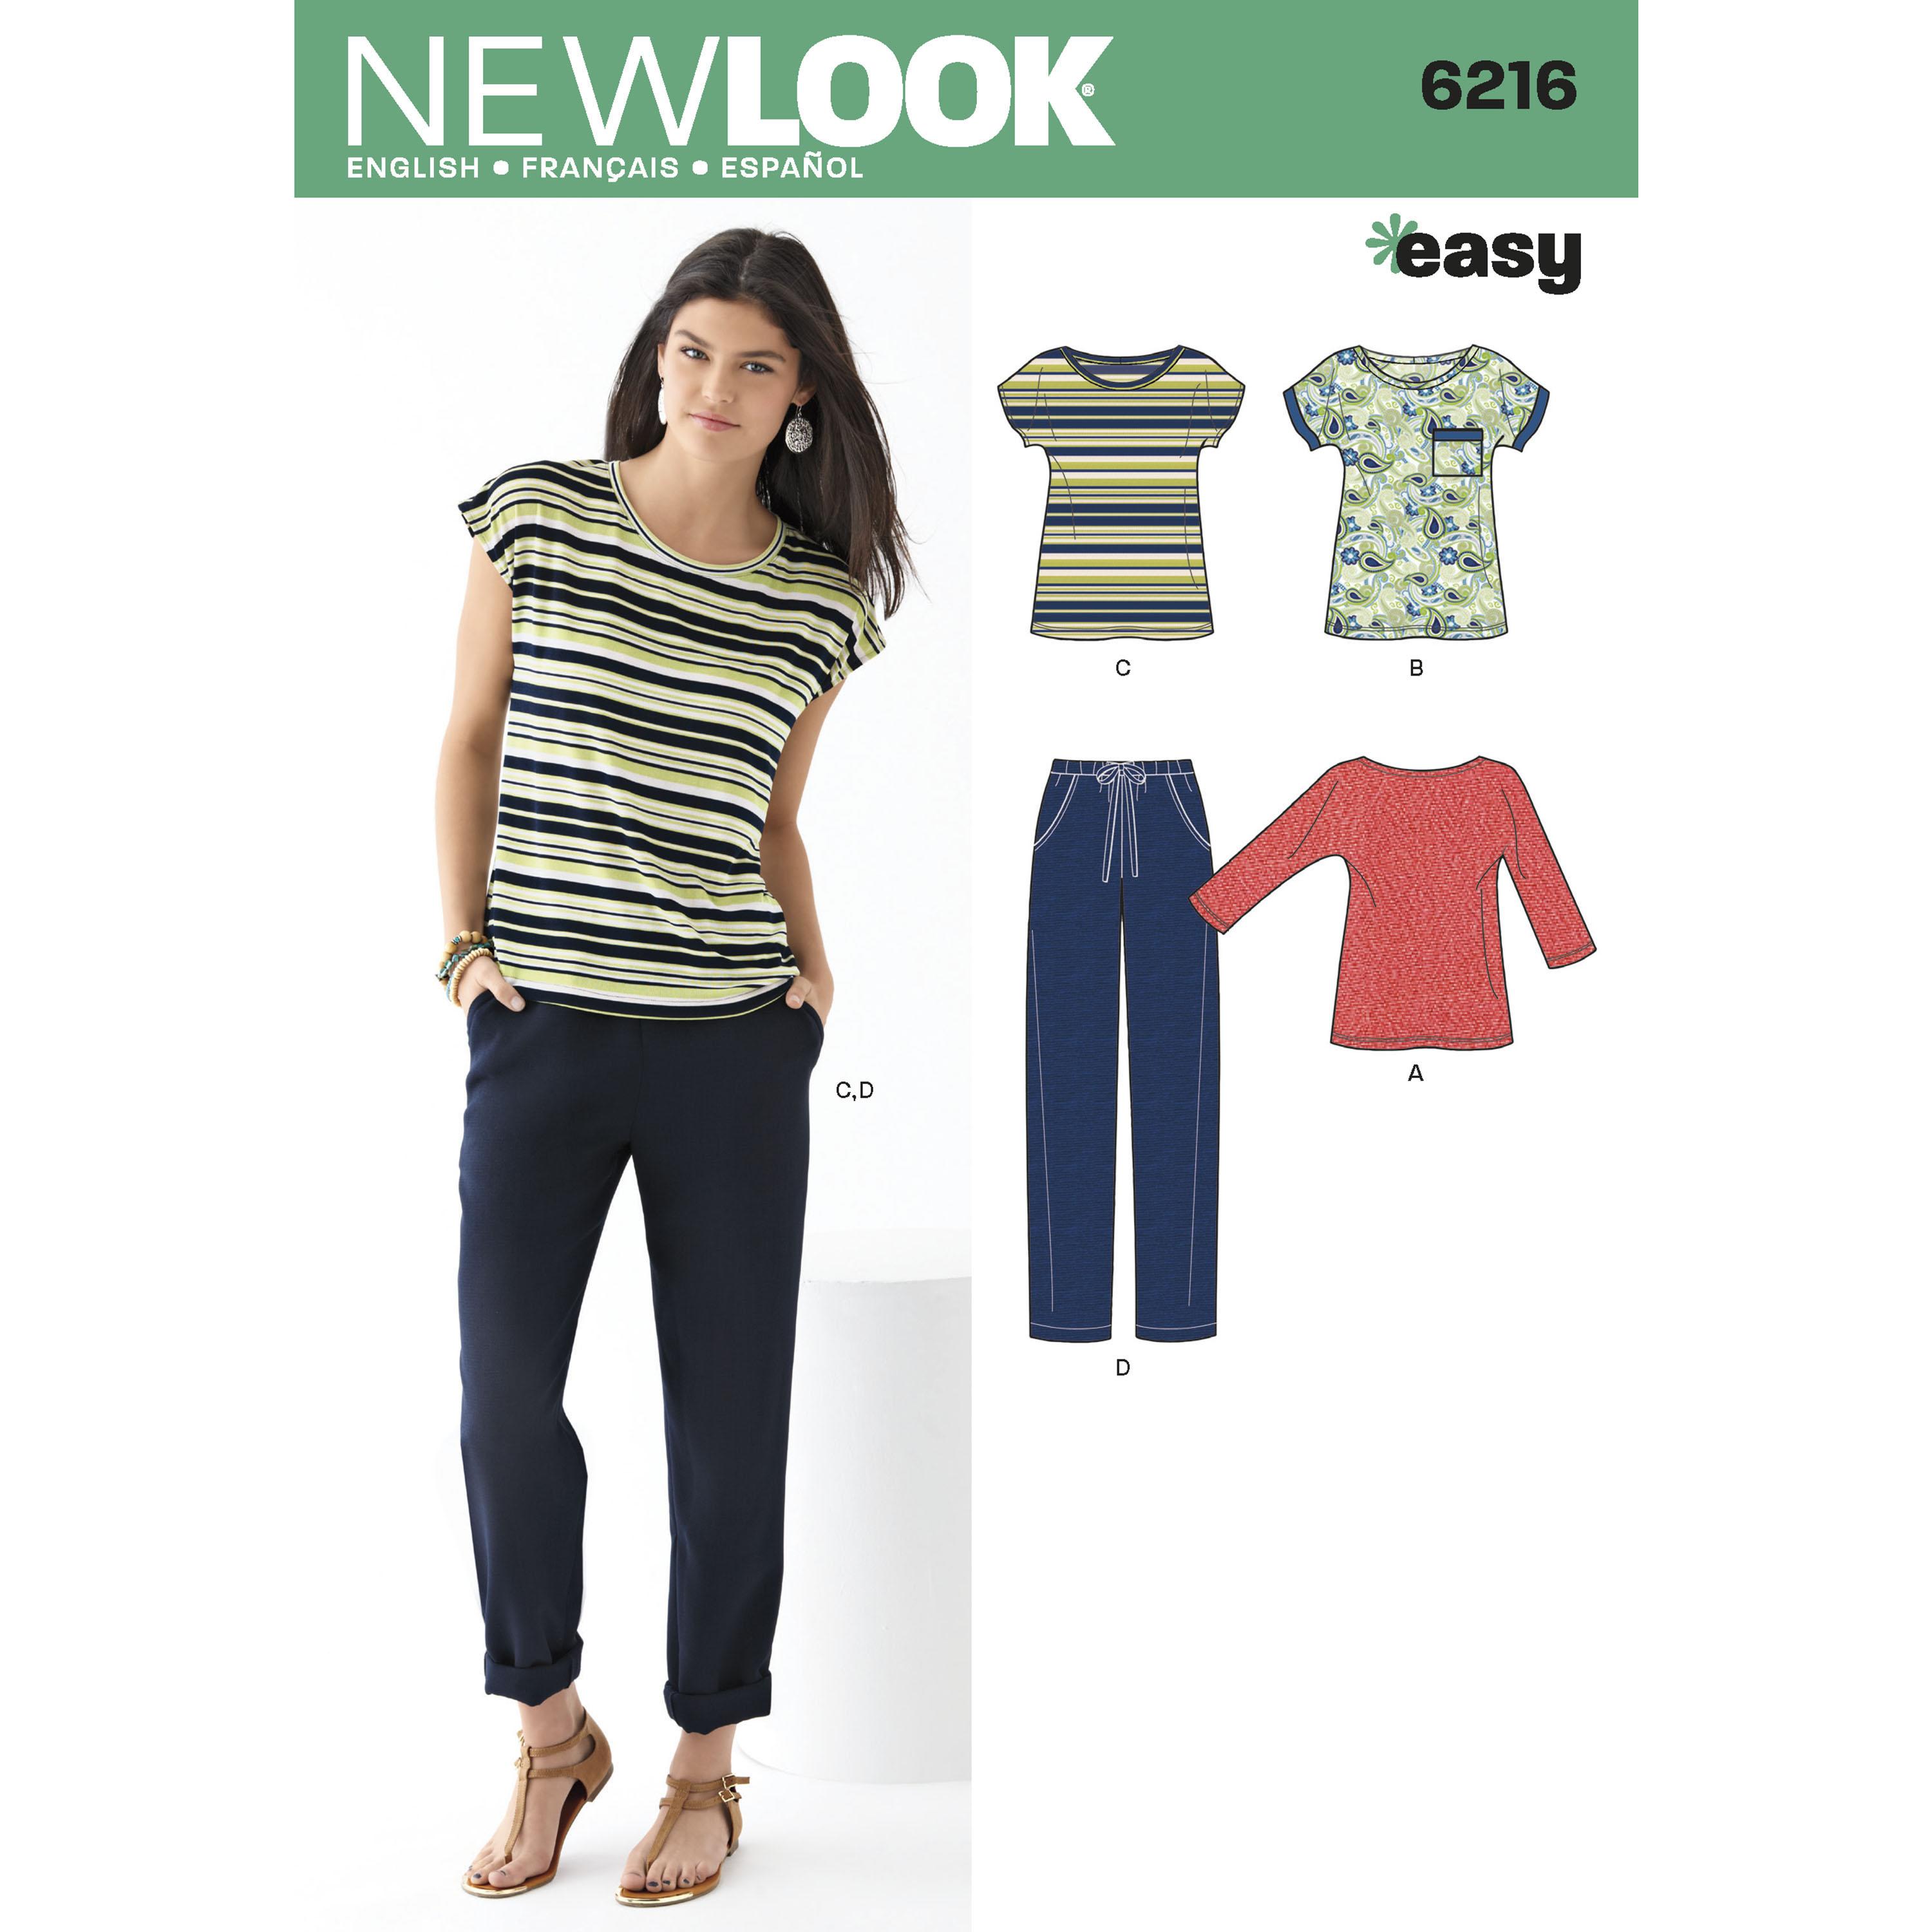 NewLook N6216 Misses' Knit Tops and Pants